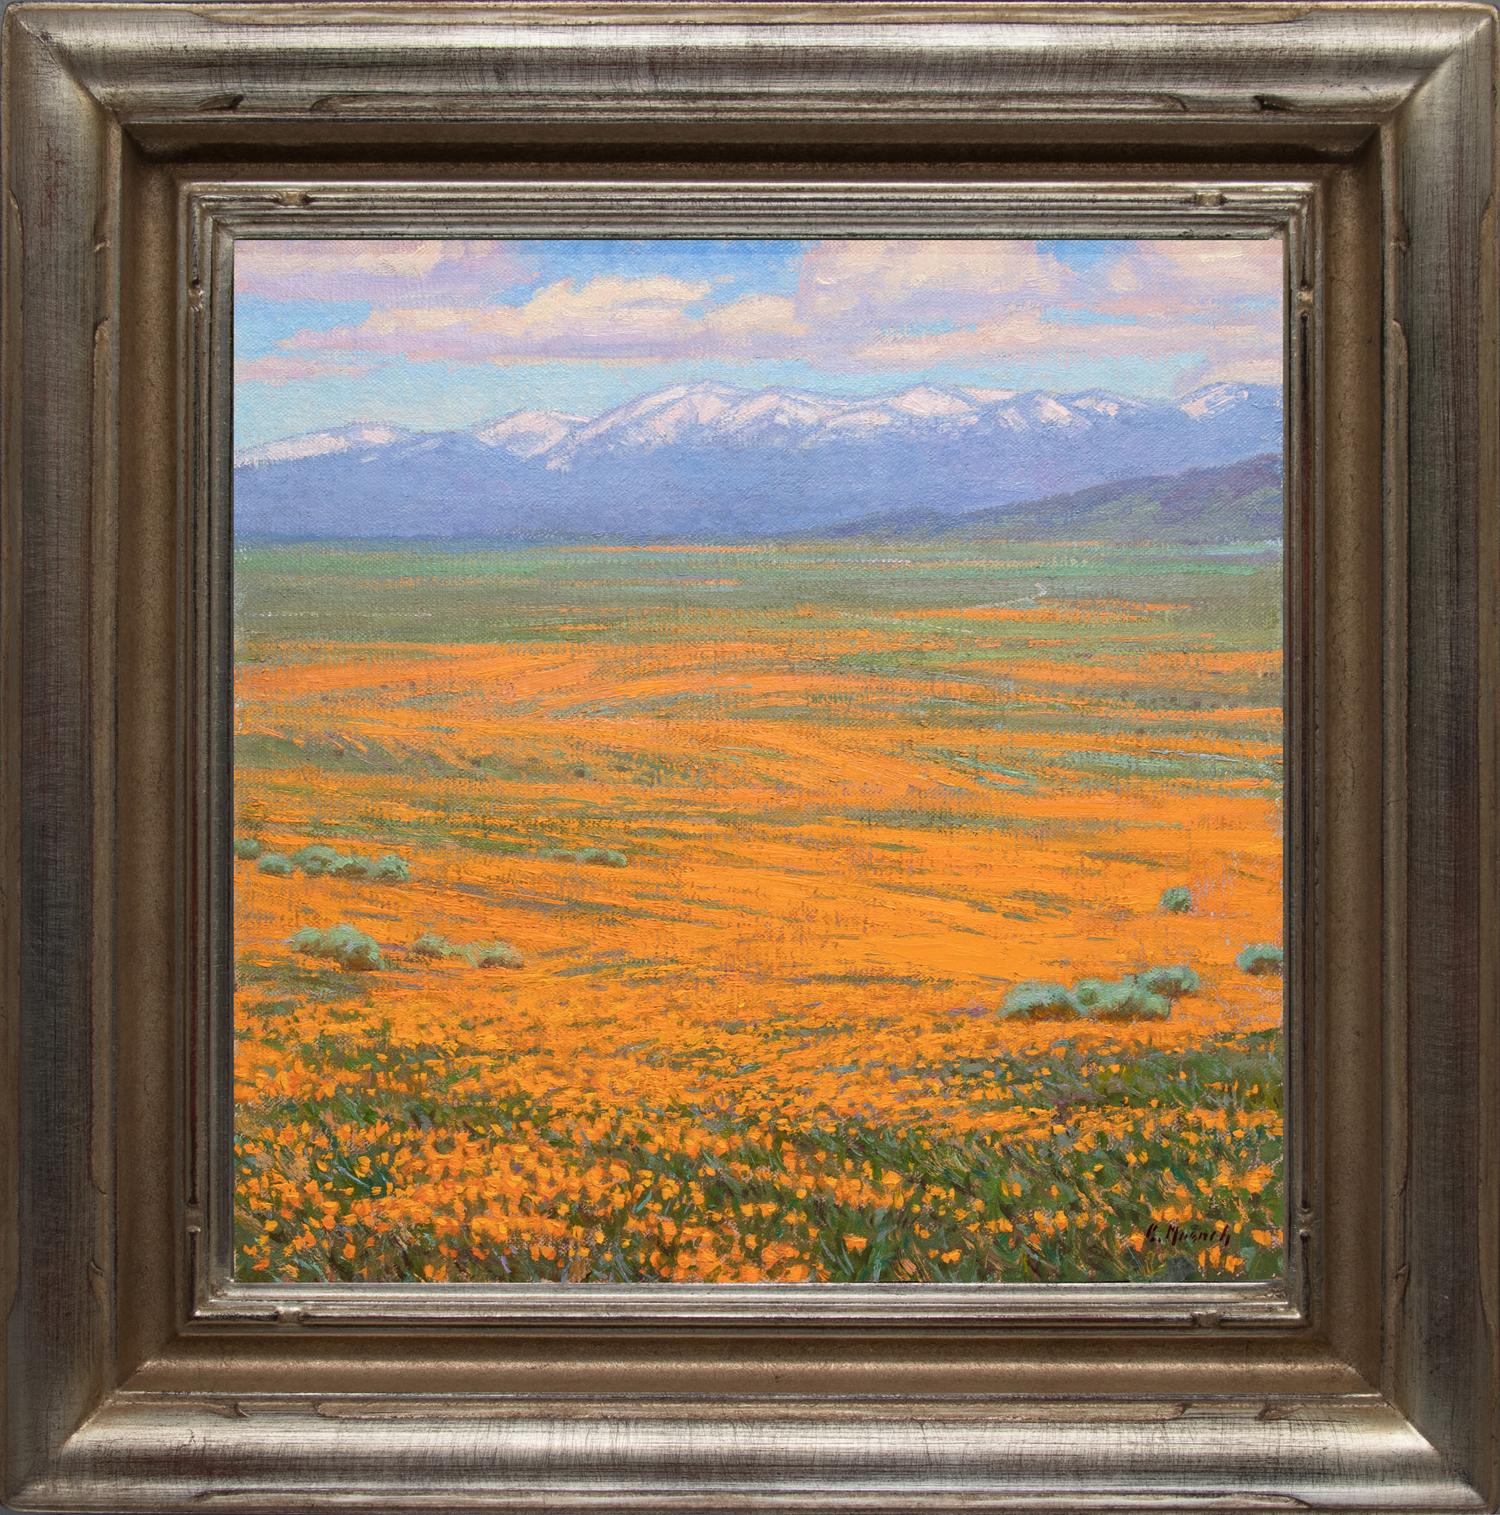 Charles Muench Landscape Painting - California Superbloom